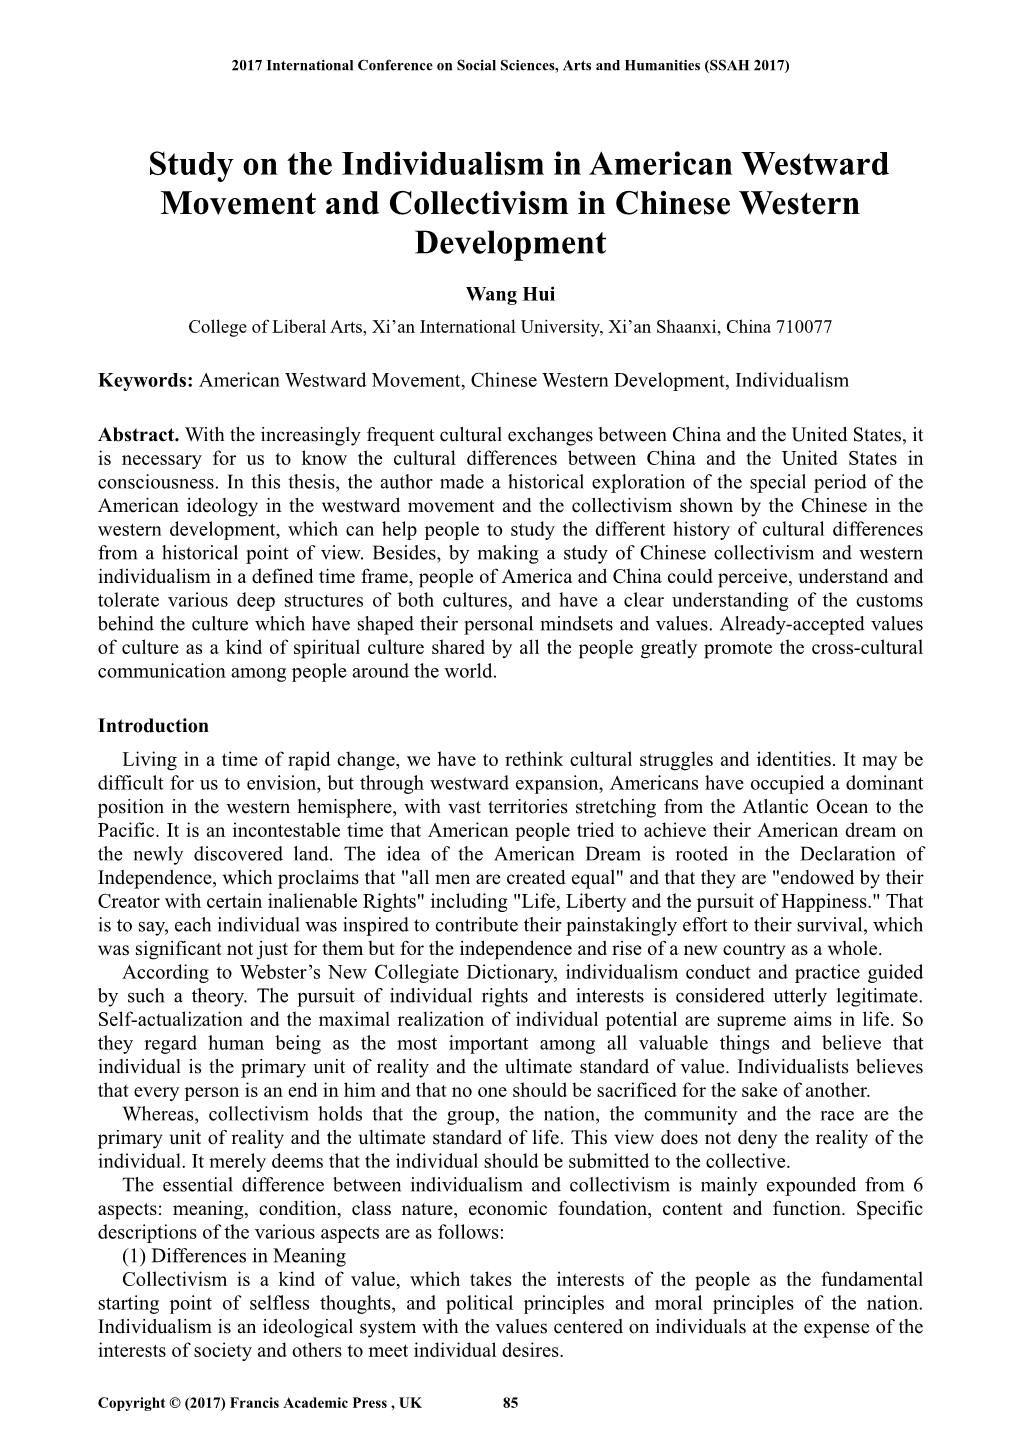 Study on the Individualism in American Westward Movement and Collectivism in Chinese Western Development